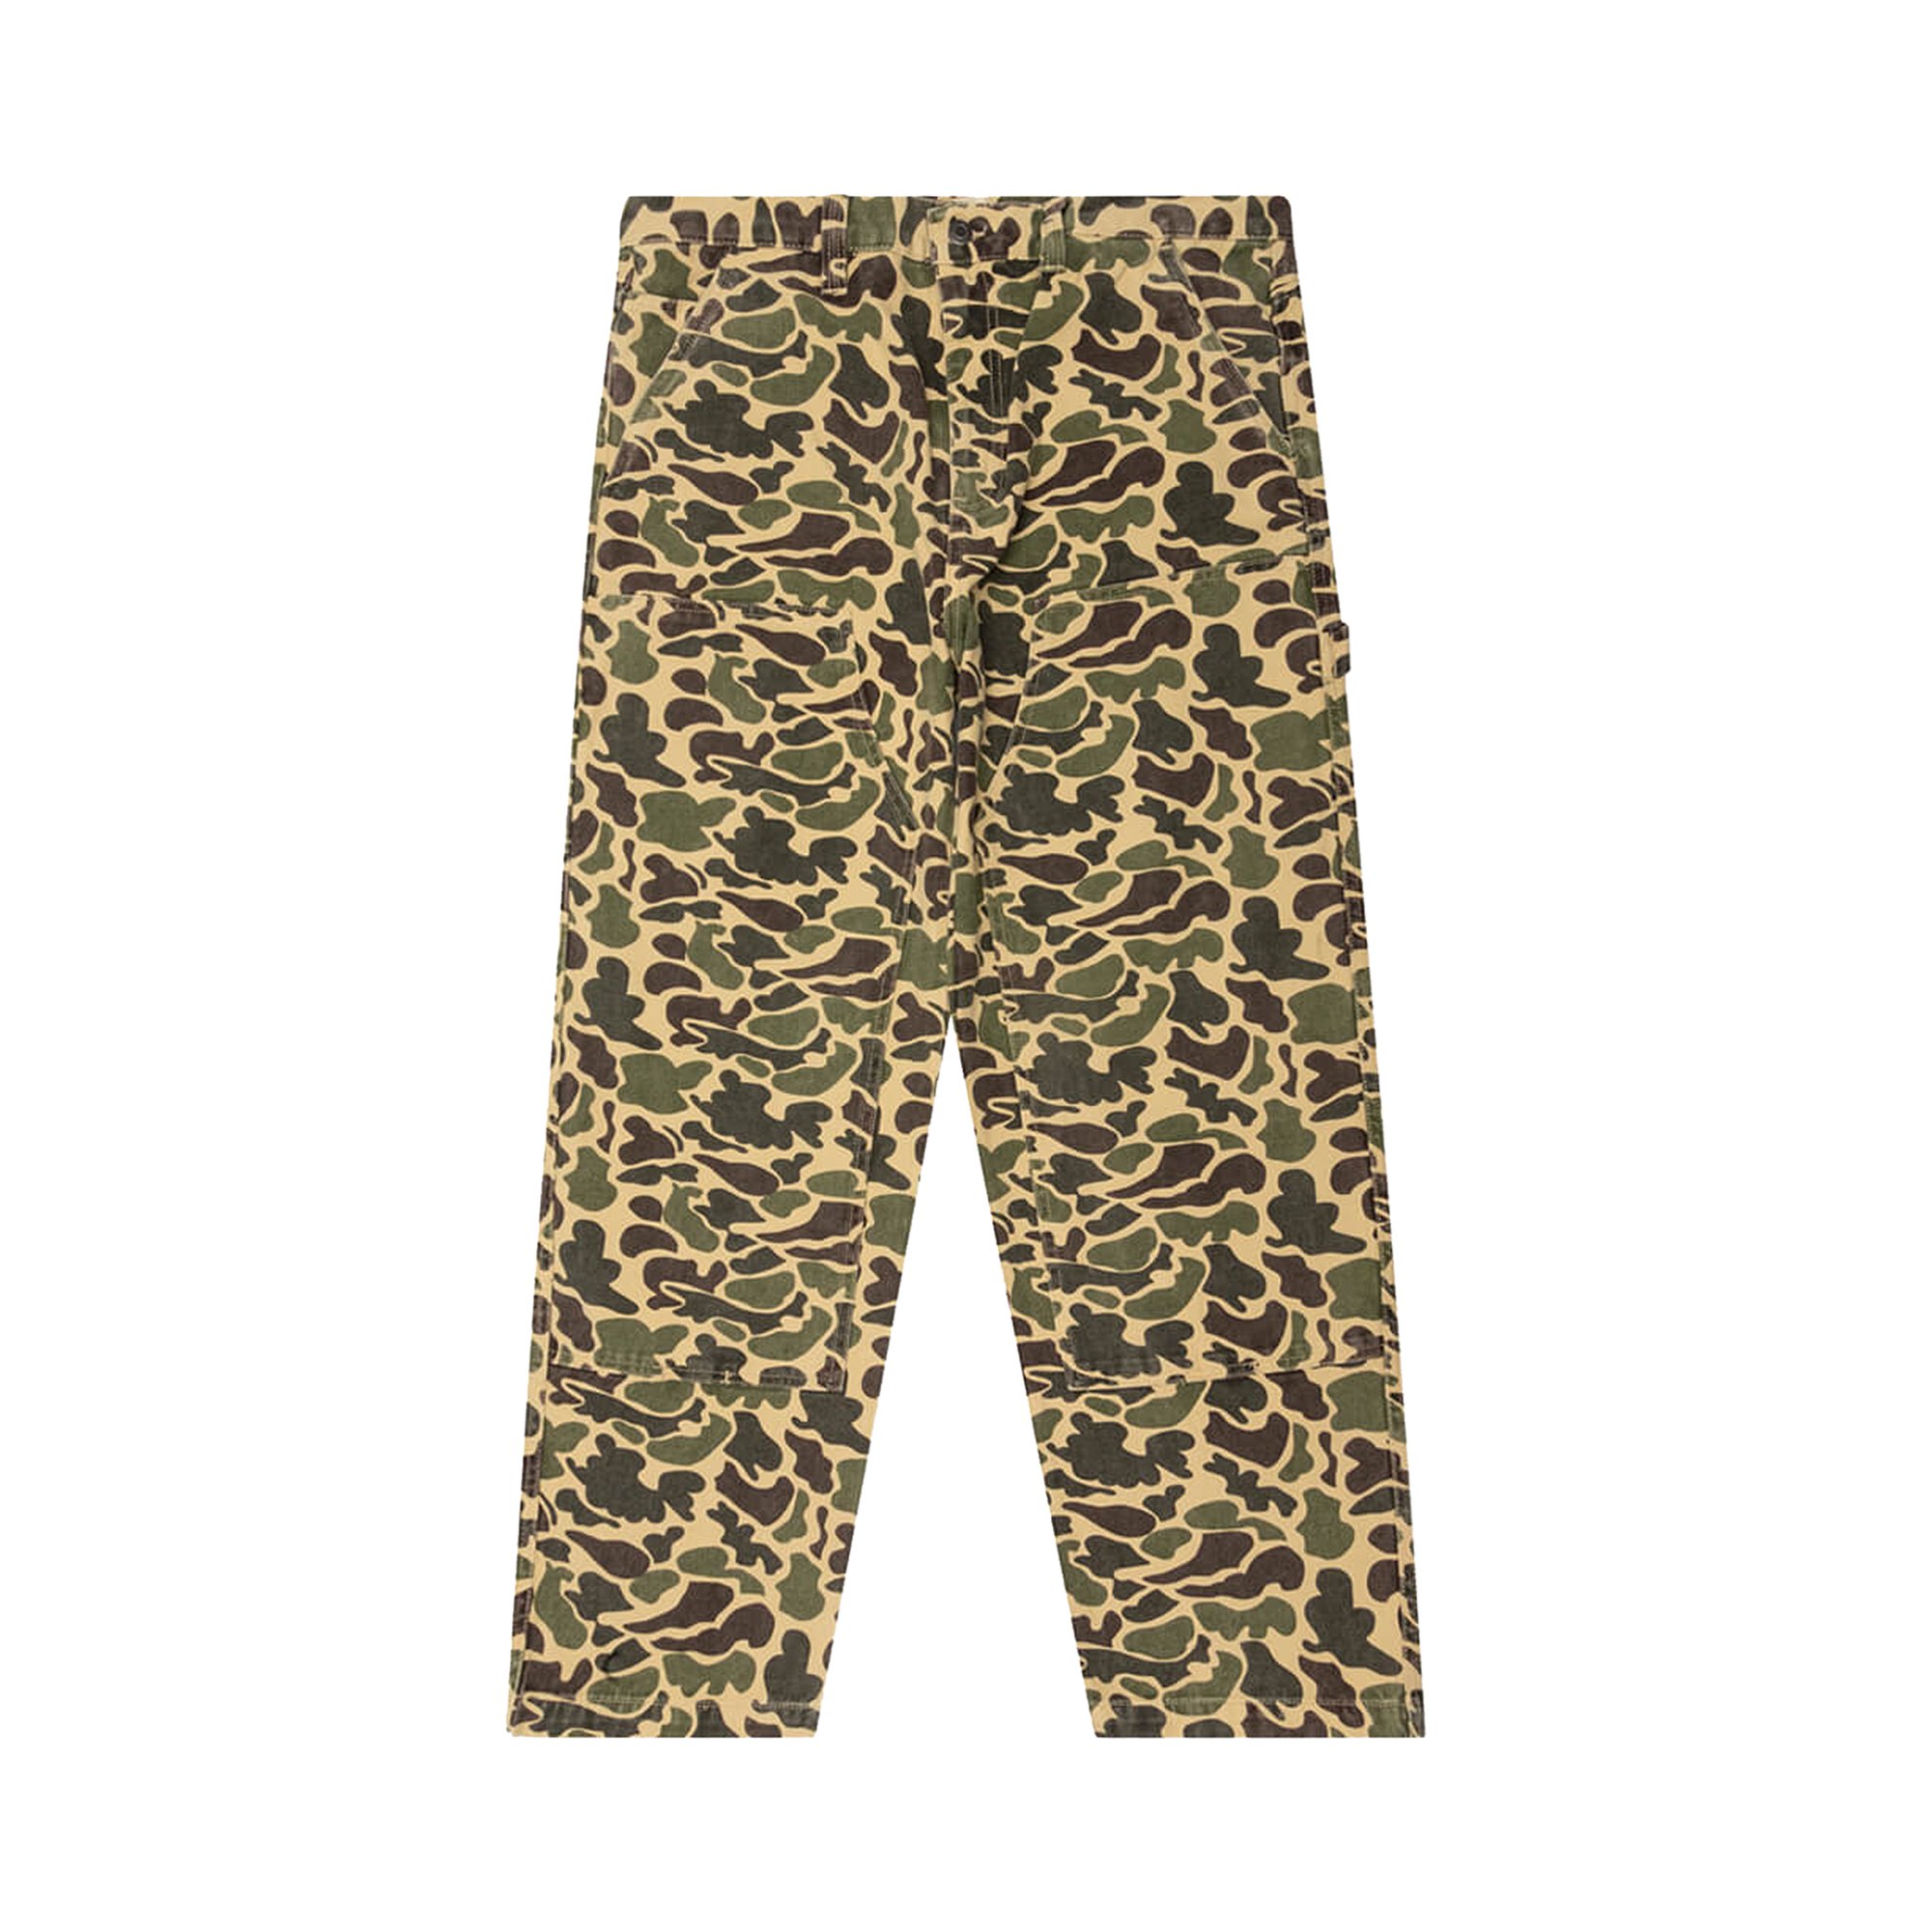 Buy Stussy Camo Canvas Work Pant 'Brown' - 116539 BROW | GOAT